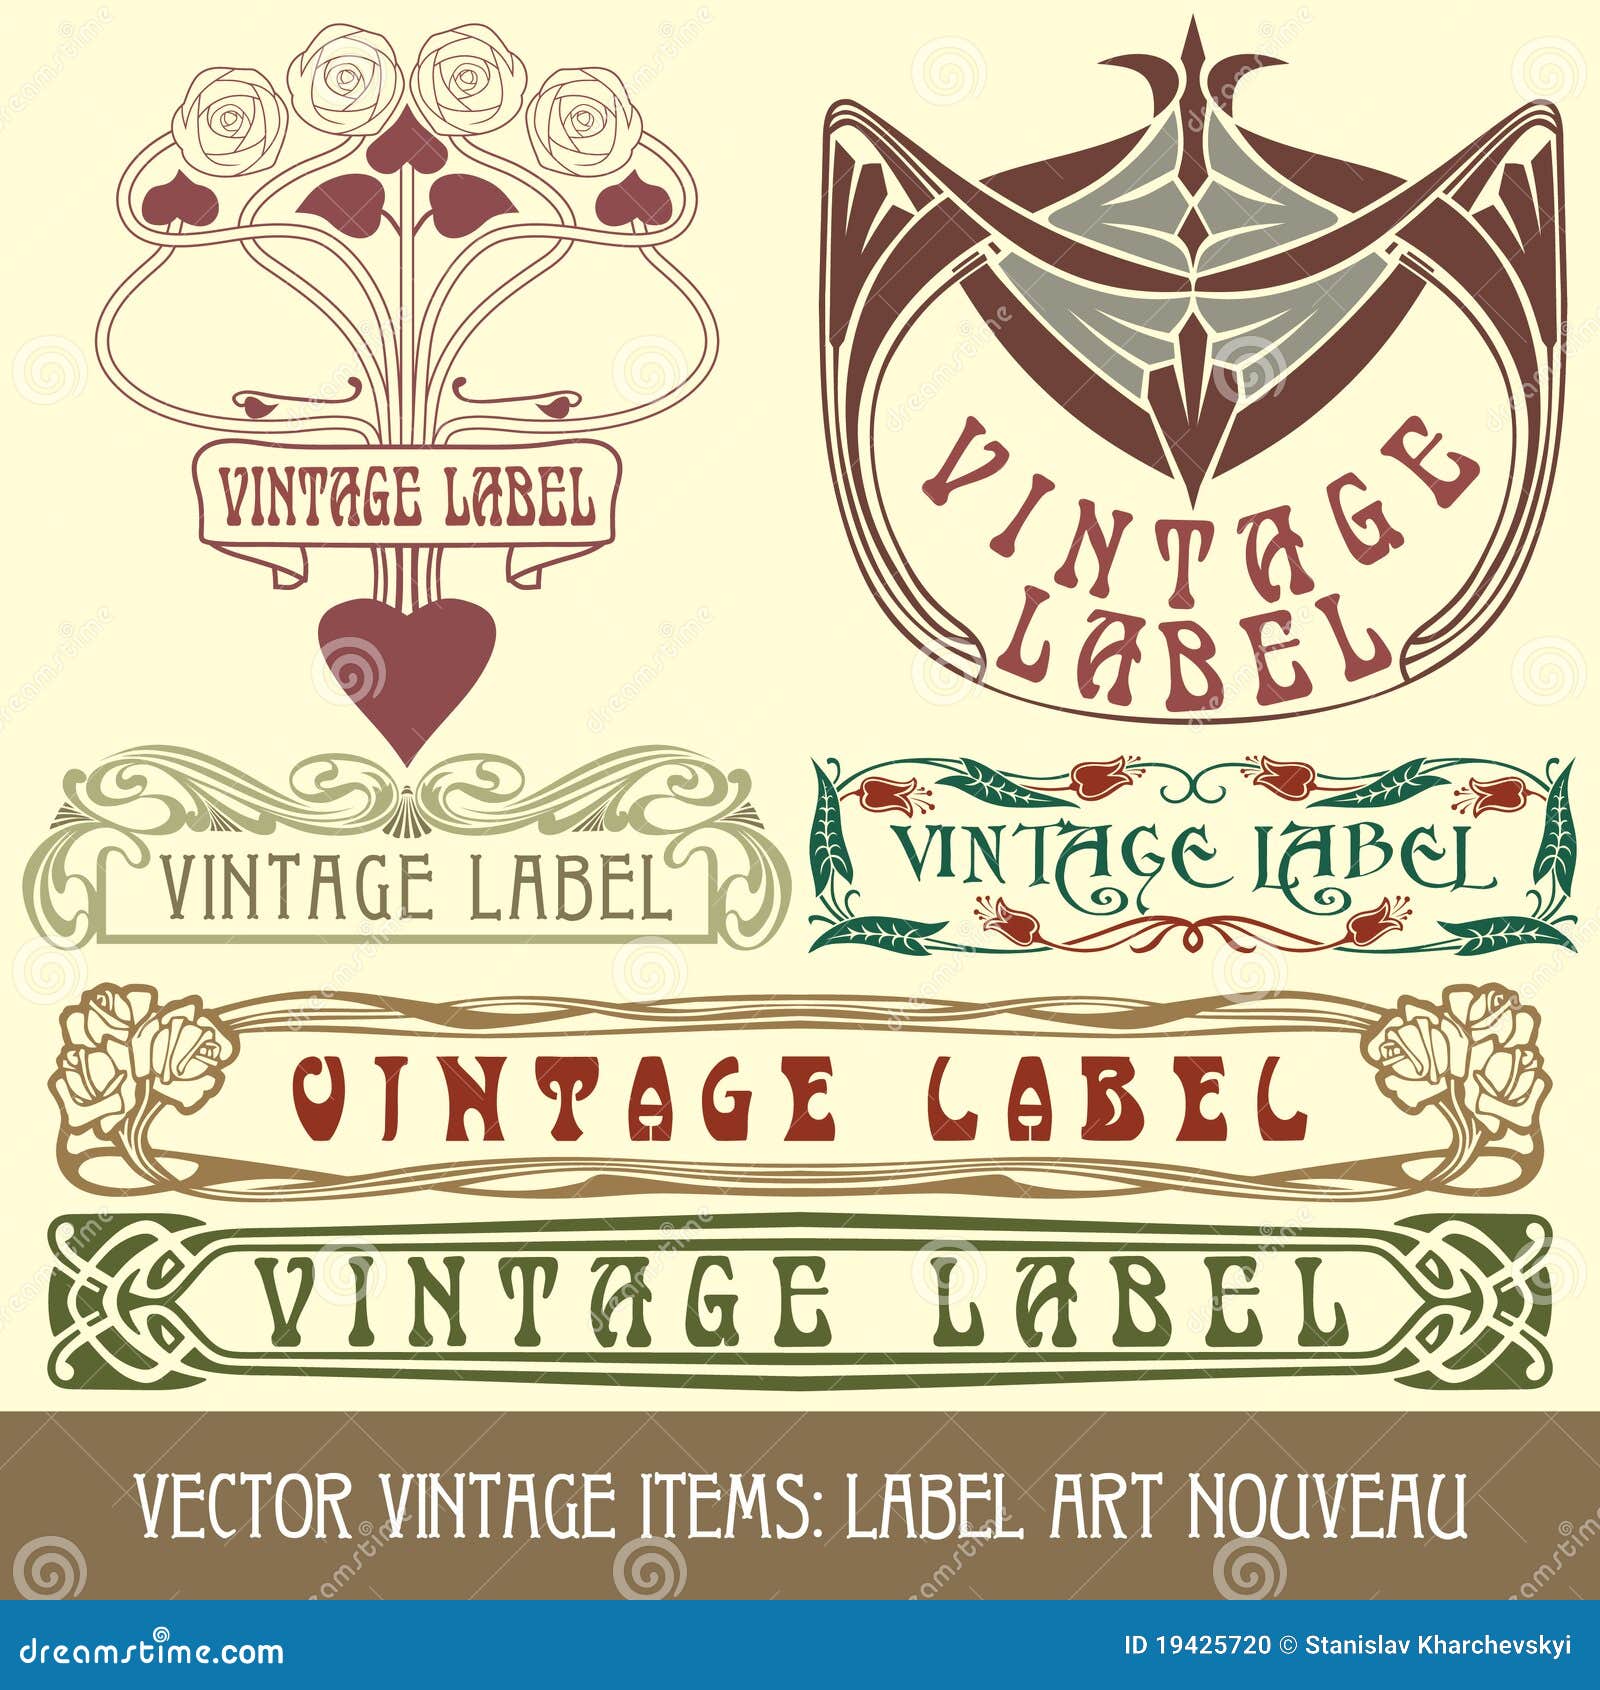 Vector vintage items stock vector. Illustration of antique - 19425720